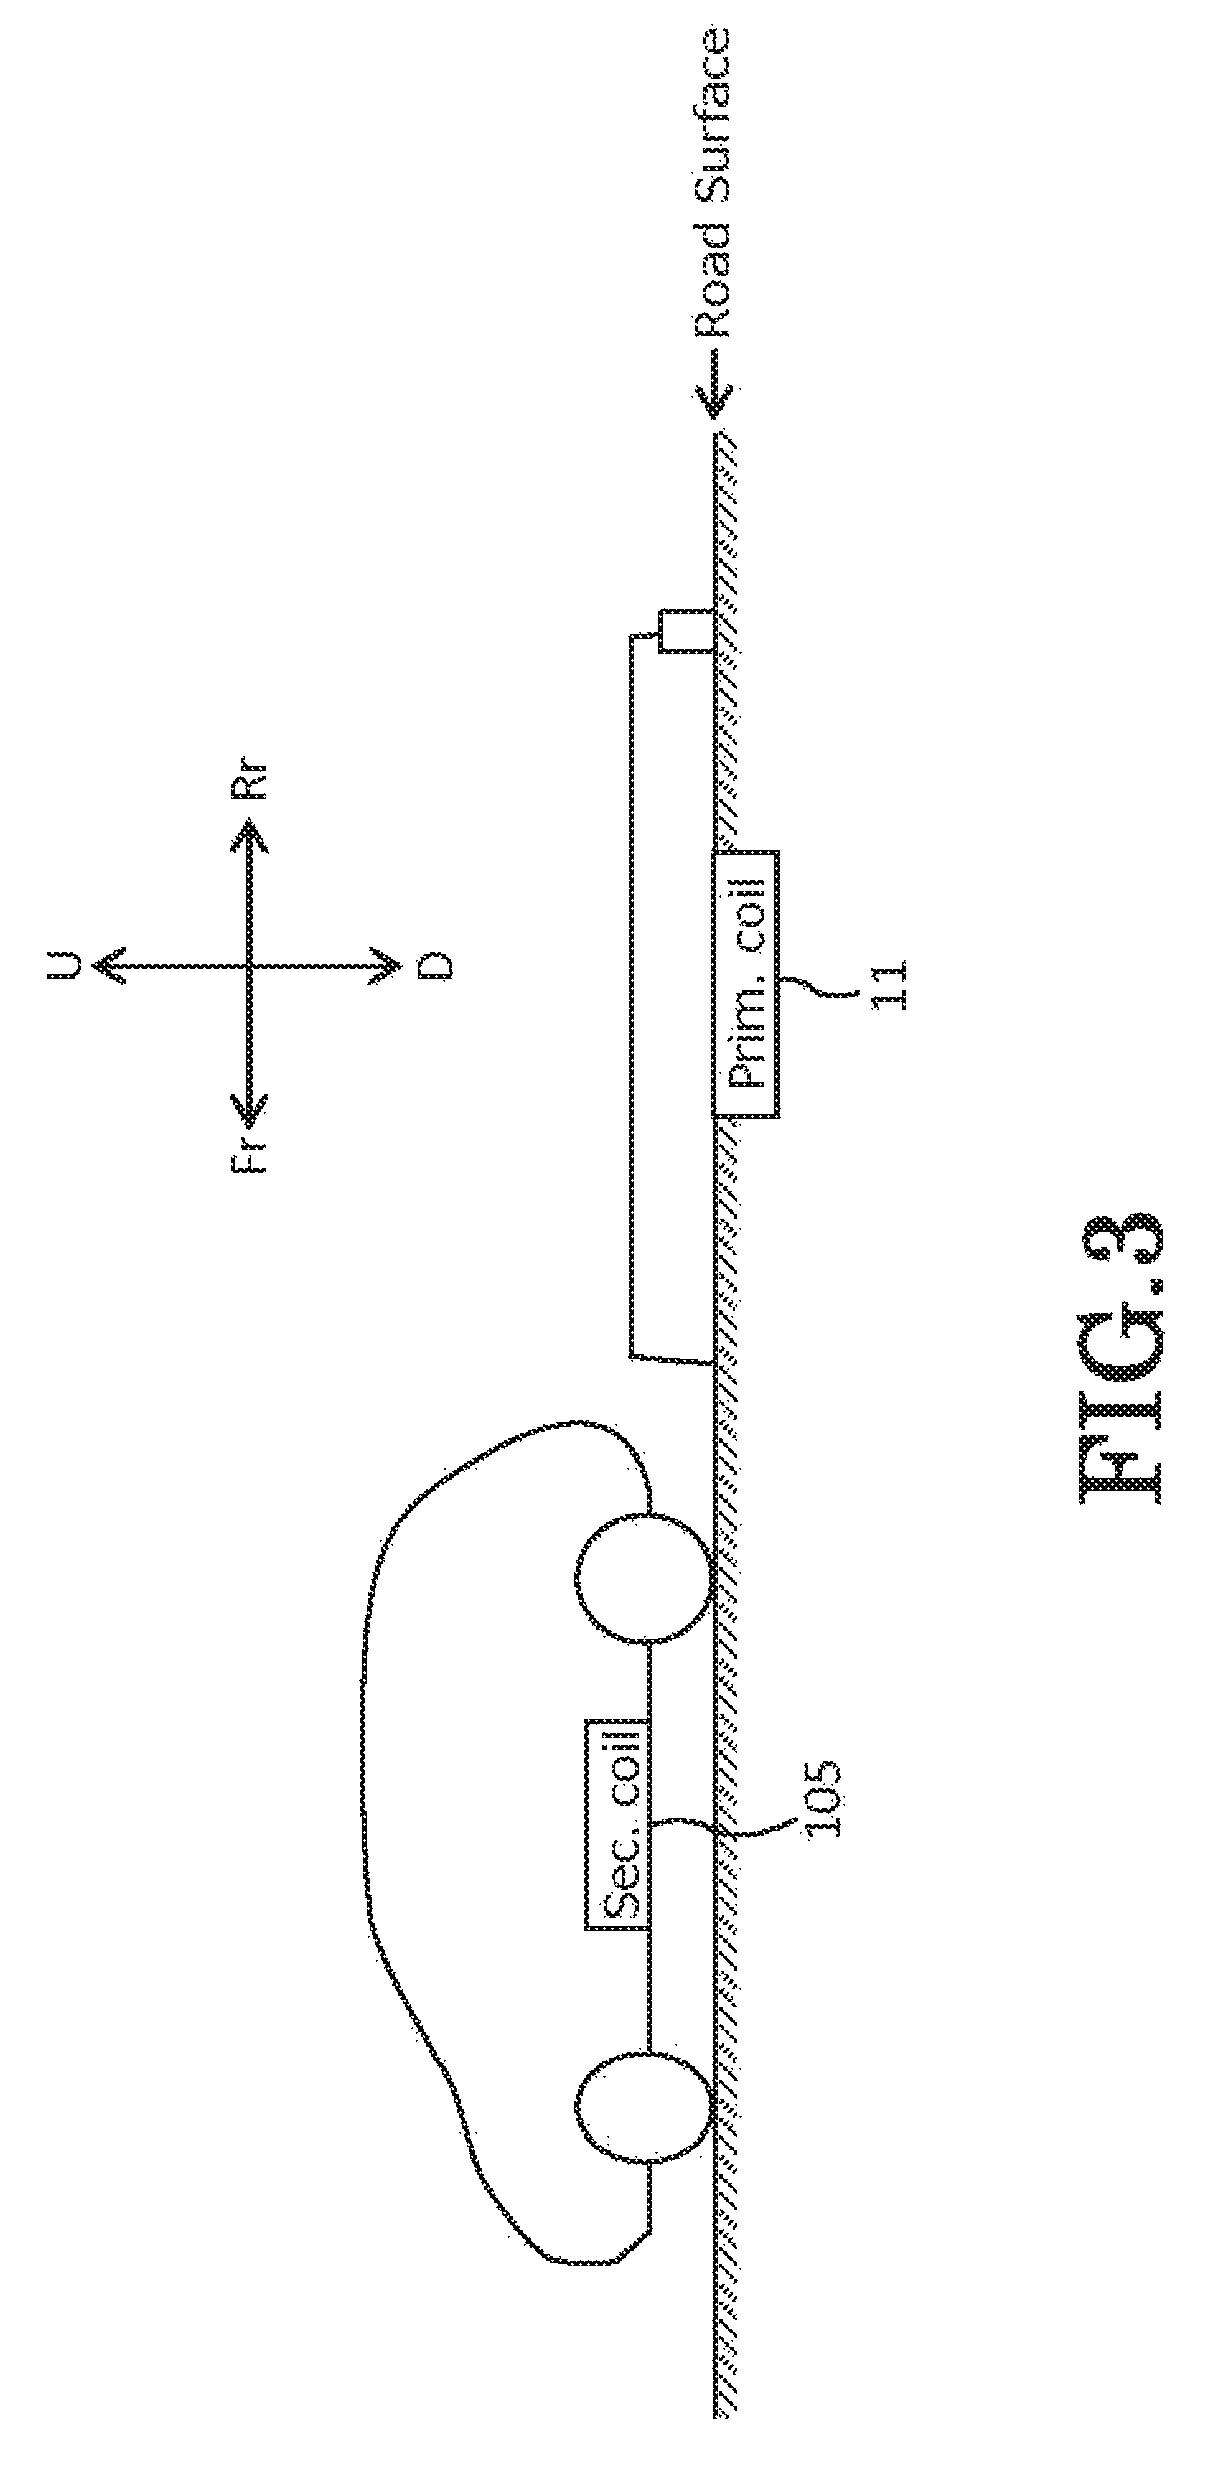 Power transmission and reception system for vehicle with graphical alignment